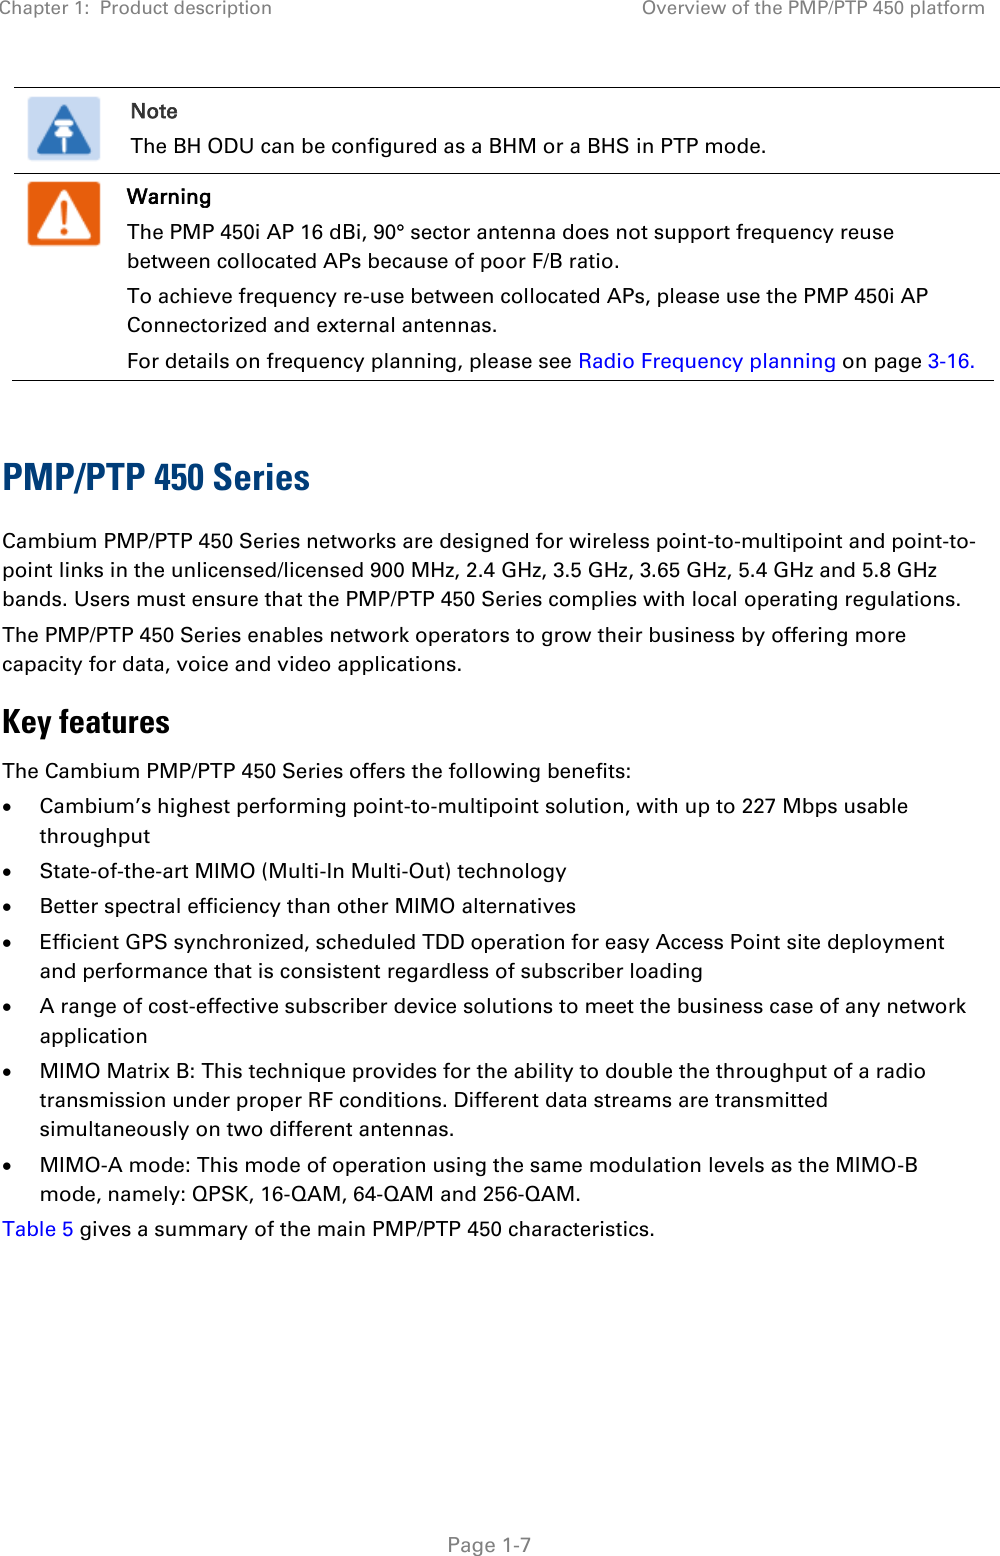 Chapter 1:  Product description Overview of the PMP/PTP 450 platform   Page 1-7  Note The BH ODU can be configured as a BHM or a BHS in PTP mode.  Warning The PMP 450i AP 16 dBi, 90° sector antenna does not support frequency reuse between collocated APs because of poor F/B ratio. To achieve frequency re-use between collocated APs, please use the PMP 450i AP Connectorized and external antennas. For details on frequency planning, please see Radio Frequency planning on page 3-16.  PMP/PTP 450 Series Cambium PMP/PTP 450 Series networks are designed for wireless point-to-multipoint and point-to-point links in the unlicensed/licensed 900 MHz, 2.4 GHz, 3.5 GHz, 3.65 GHz, 5.4 GHz and 5.8 GHz bands. Users must ensure that the PMP/PTP 450 Series complies with local operating regulations.  The PMP/PTP 450 Series enables network operators to grow their business by offering more capacity for data, voice and video applications. Key features The Cambium PMP/PTP 450 Series offers the following benefits:   Cambium’s highest performing point-to-multipoint solution, with up to 227 Mbps usable throughput   State-of-the-art MIMO (Multi-In Multi-Out) technology   Better spectral efficiency than other MIMO alternatives   Efficient GPS synchronized, scheduled TDD operation for easy Access Point site deployment and performance that is consistent regardless of subscriber loading   A range of cost-effective subscriber device solutions to meet the business case of any network application   MIMO Matrix B: This technique provides for the ability to double the throughput of a radio transmission under proper RF conditions. Different data streams are transmitted simultaneously on two different antennas.   MIMO-A mode: This mode of operation using the same modulation levels as the MIMO-B mode, namely: QPSK, 16-QAM, 64-QAM and 256-QAM.  Table 5 gives a summary of the main PMP/PTP 450 characteristics.   